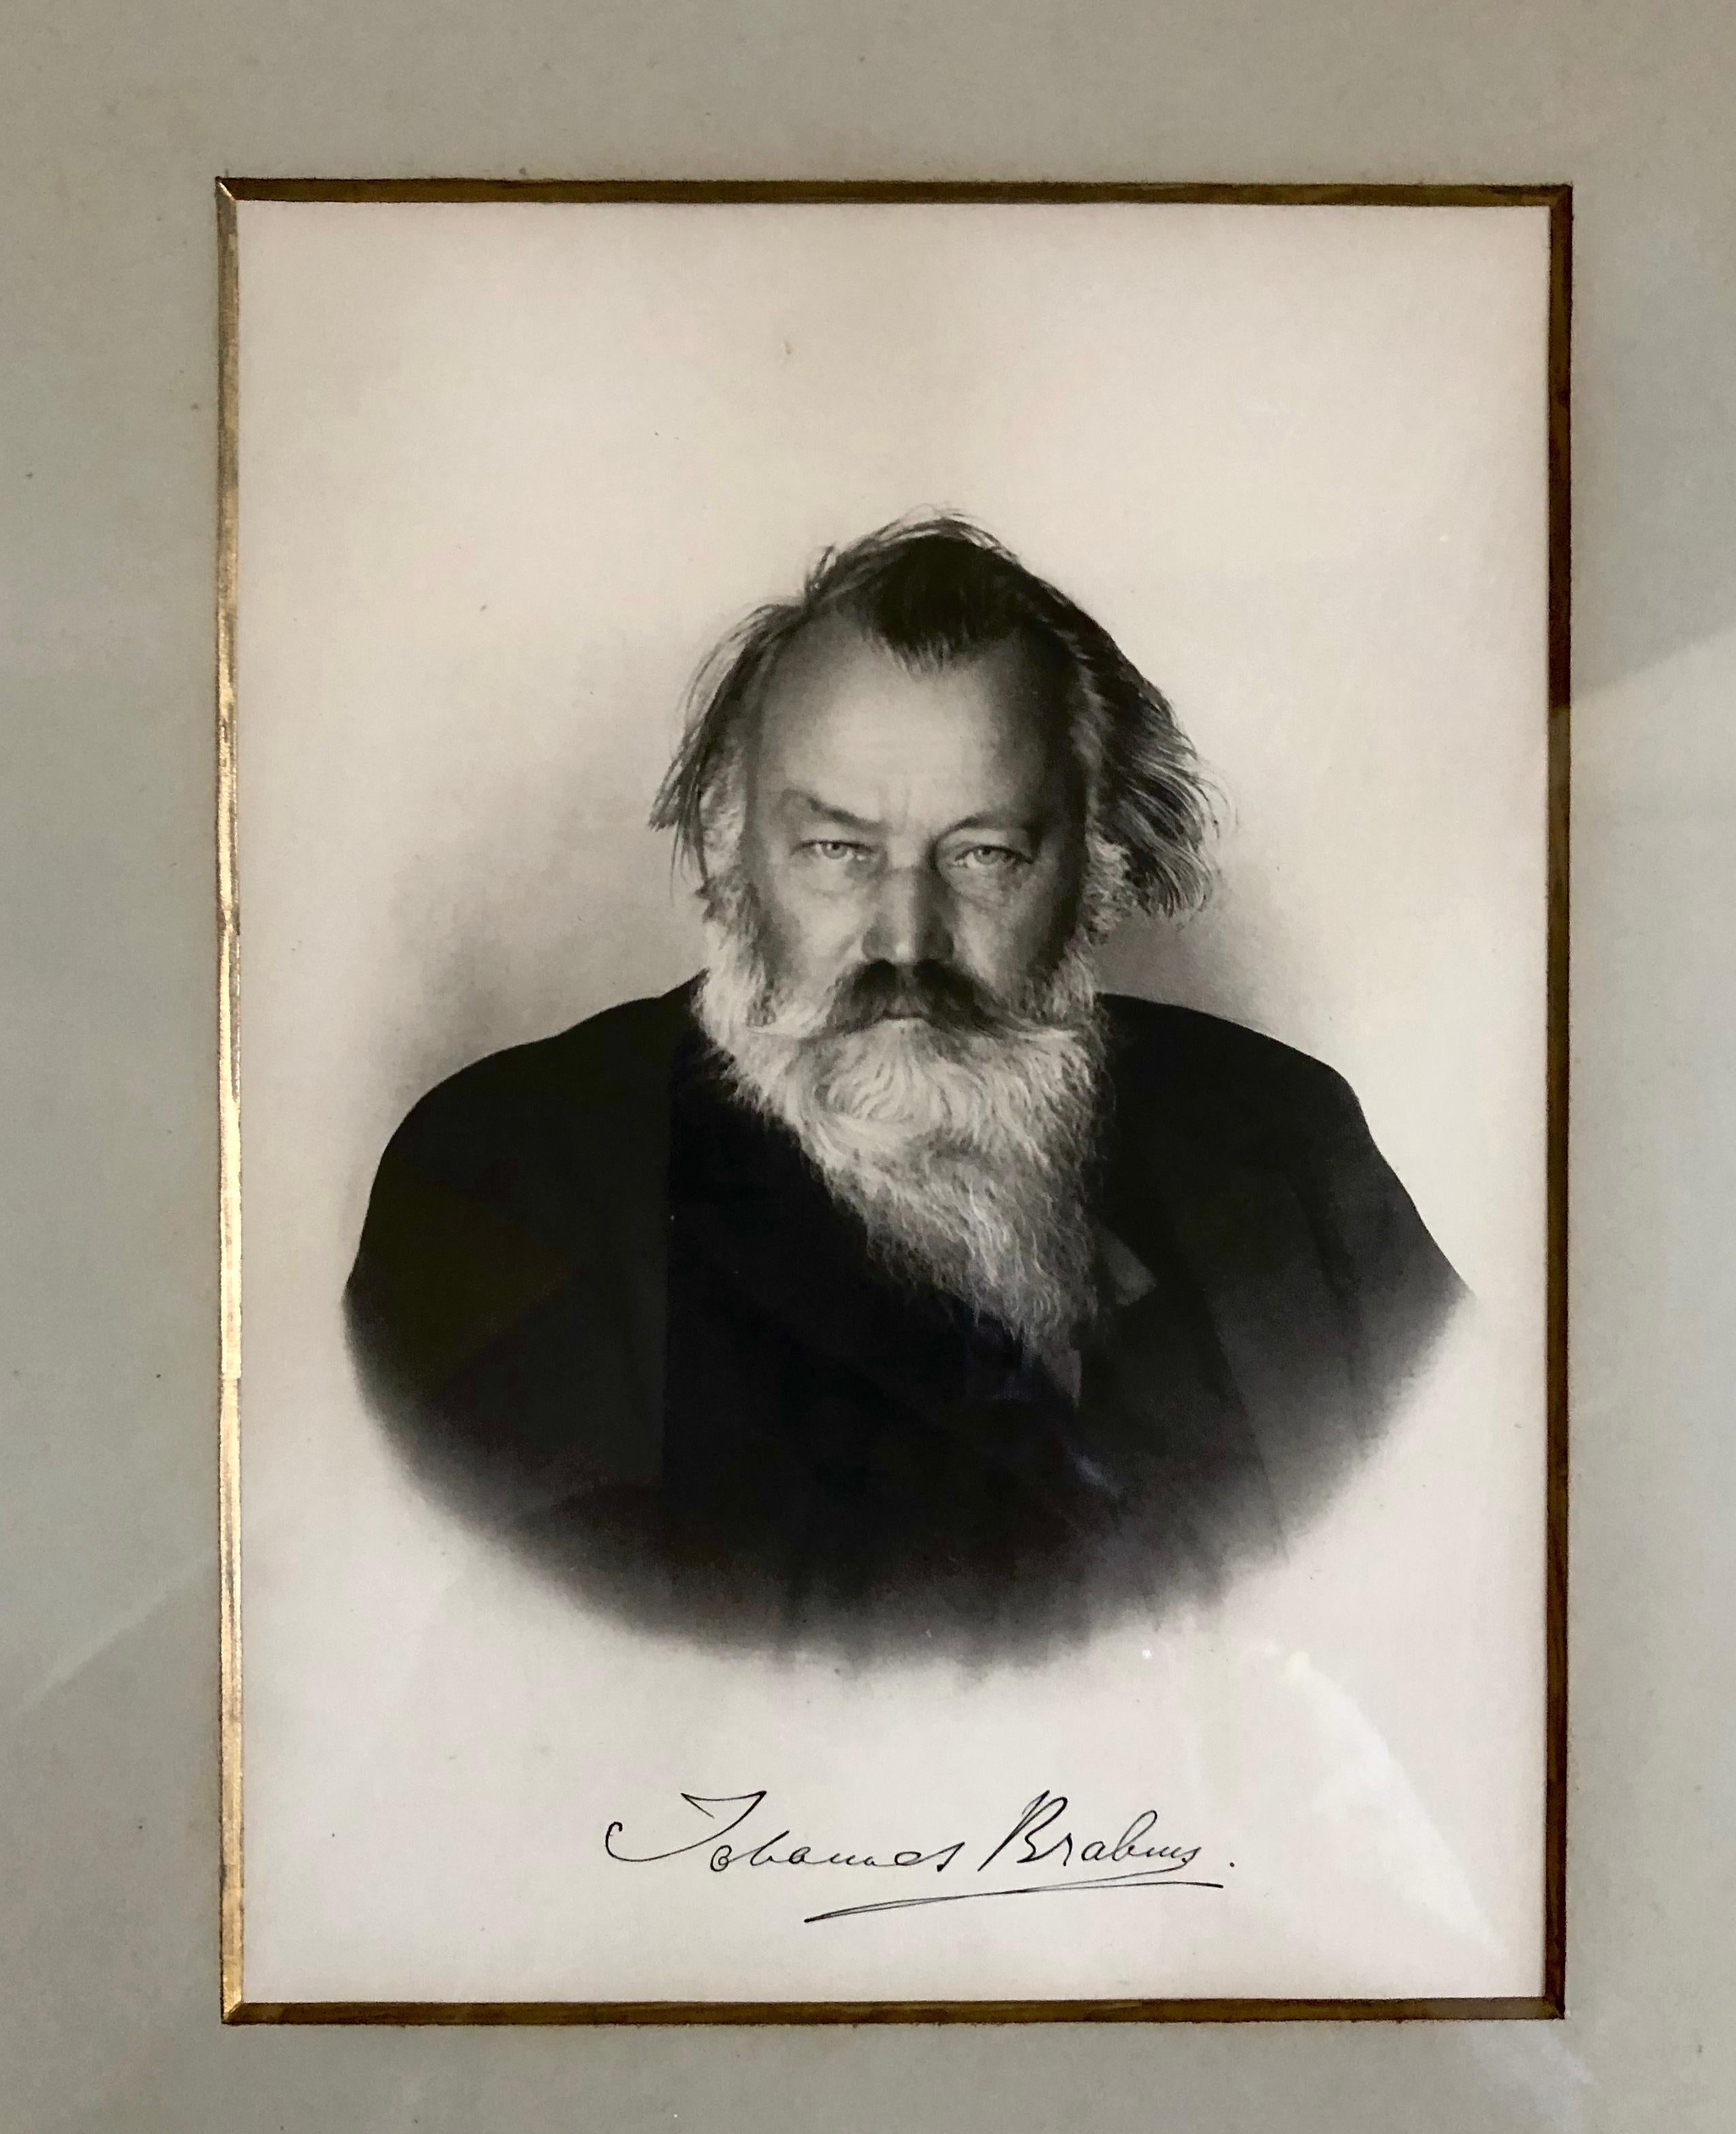 Johannes Brahms autographed hand signed in ink engraving etching 1885 with original cardboard to back of frame.
Johannes Brahms
German composer and pianist, 1833-1897

